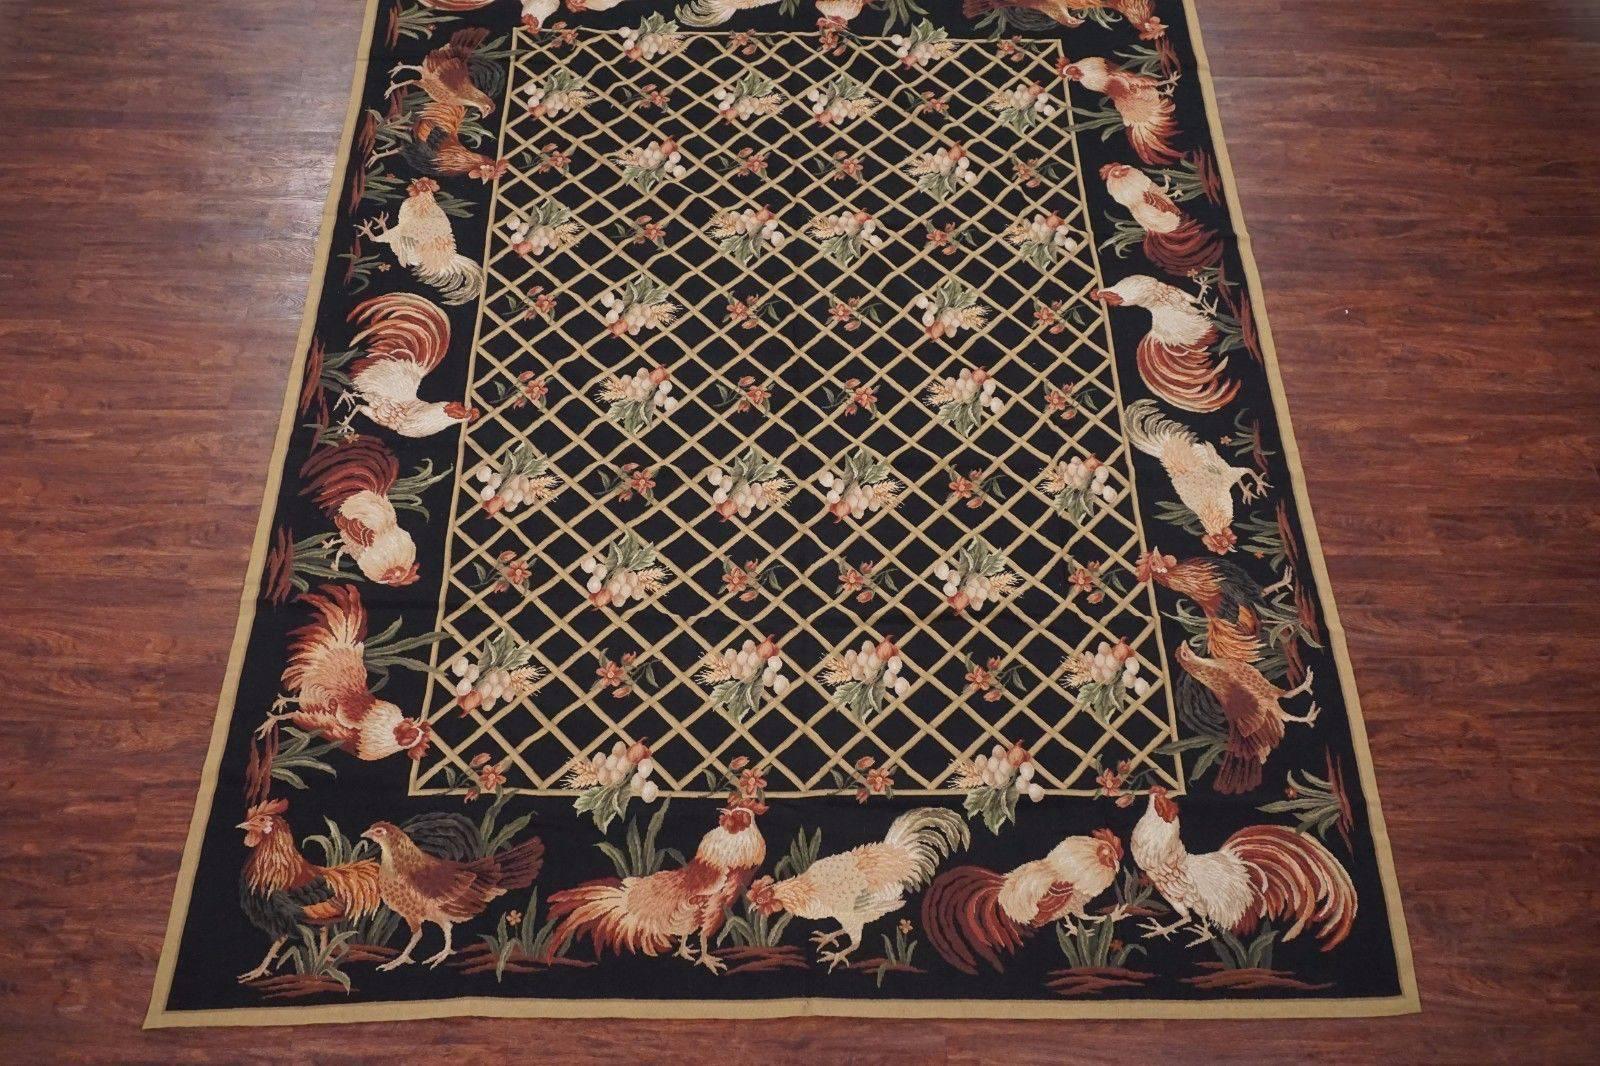 Black Needlepoint Rug with Rooster, Egg, and Floral Design

2010

Measures: 9' x 12' 4